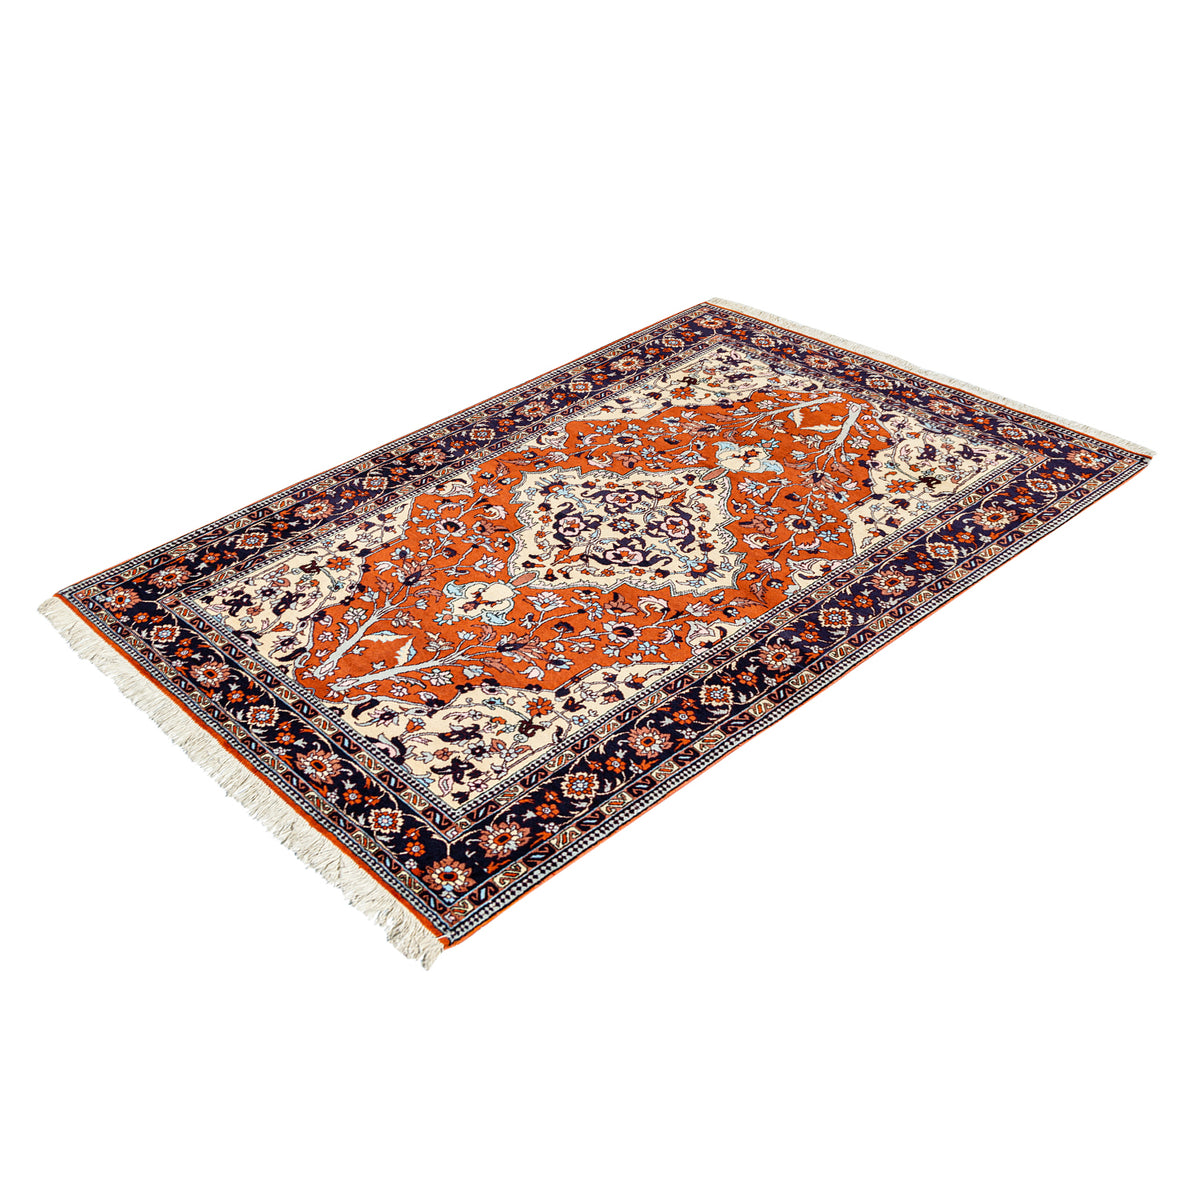 Hand-knotted Ardabil Persian Rug 163cm x 267cm